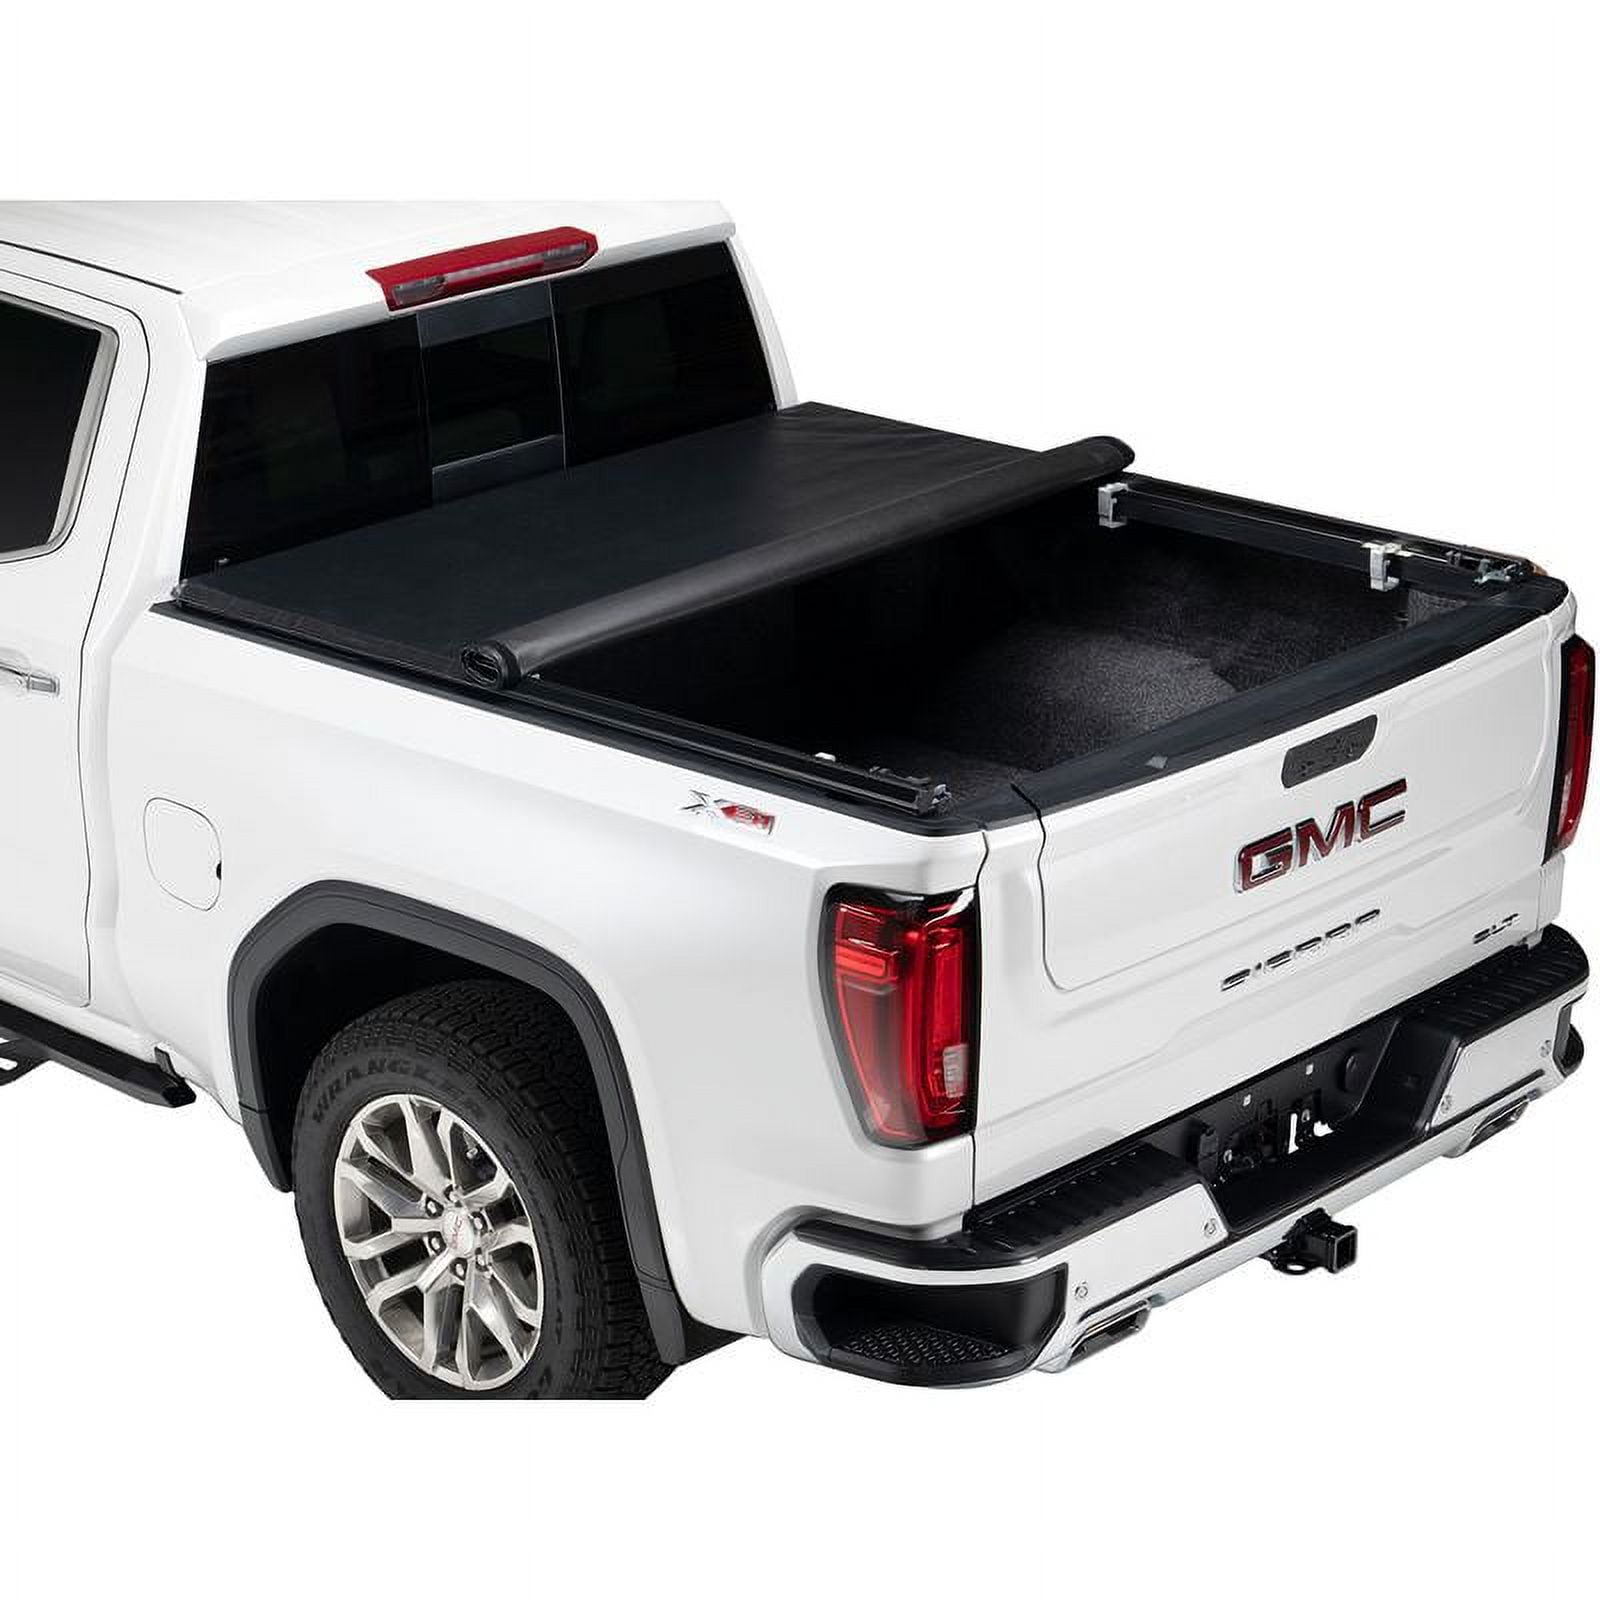 Gator by RealTruck SR1 Roll-Up (Compatible with) 2007-2013 Chevy Silverado GMC Sierra 6.5 FT Bed Only Soft Roll Up Tonneau Truck Bed Cover (55106) Made in The USA - image 1 of 7